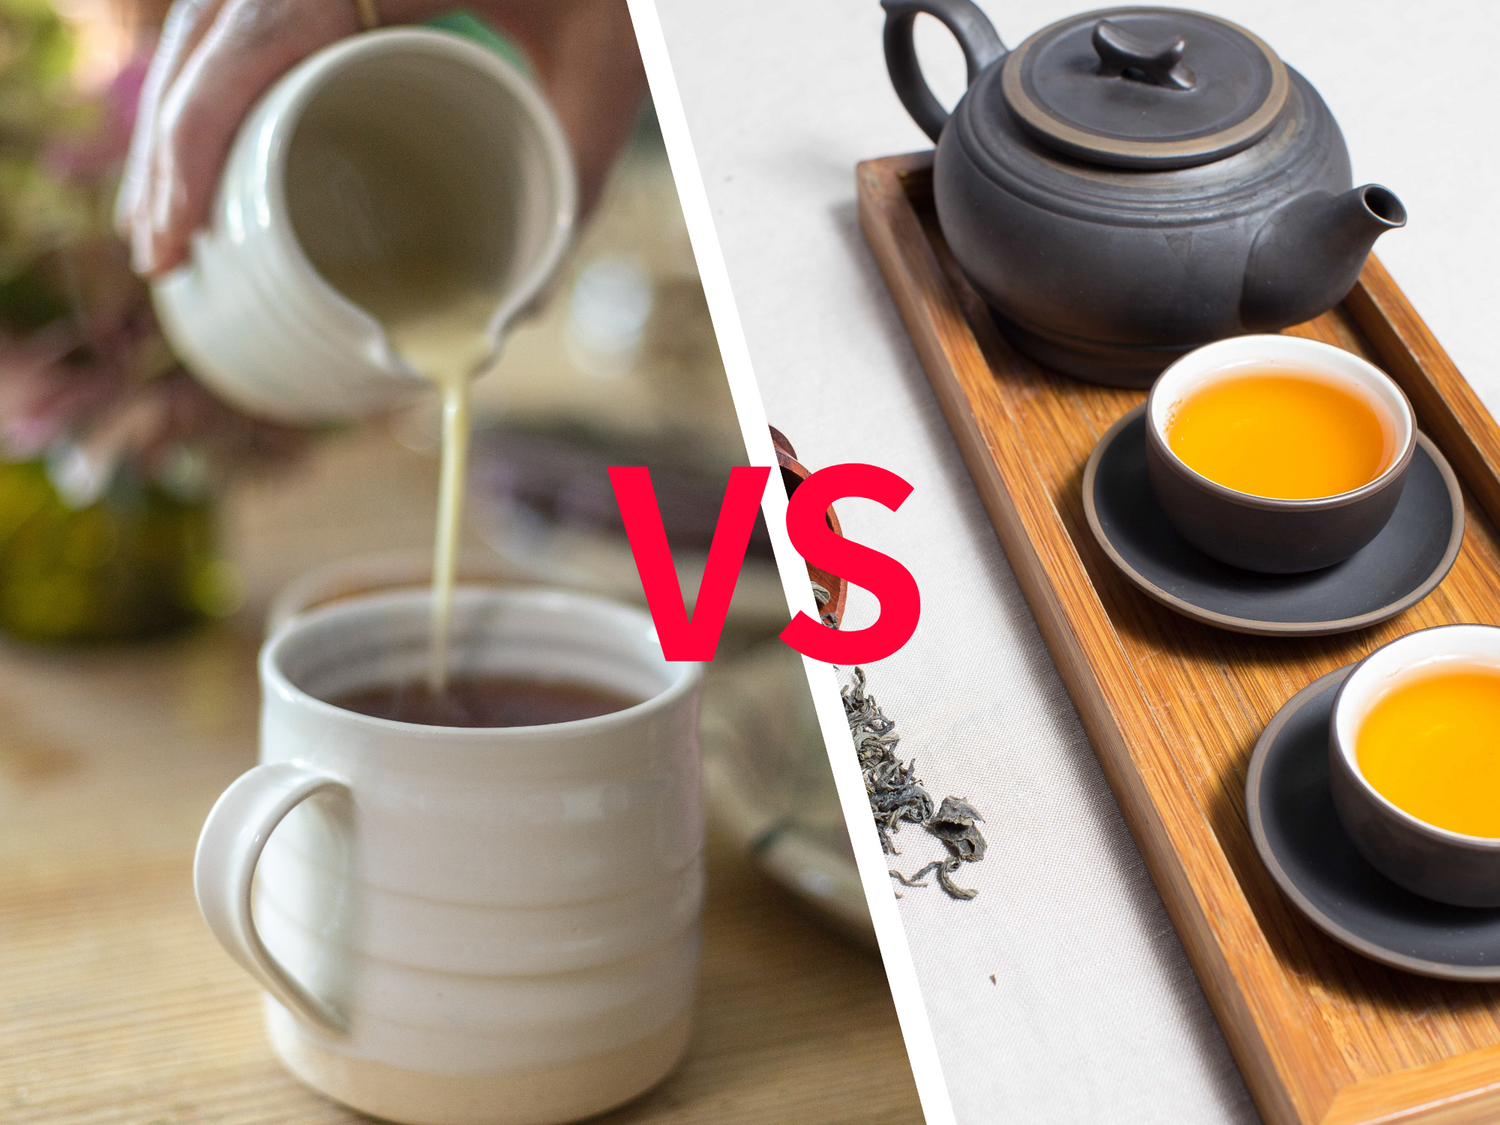 English vs. Chinese Tea Cups: Why Don't Chinese Teacups have Handles?